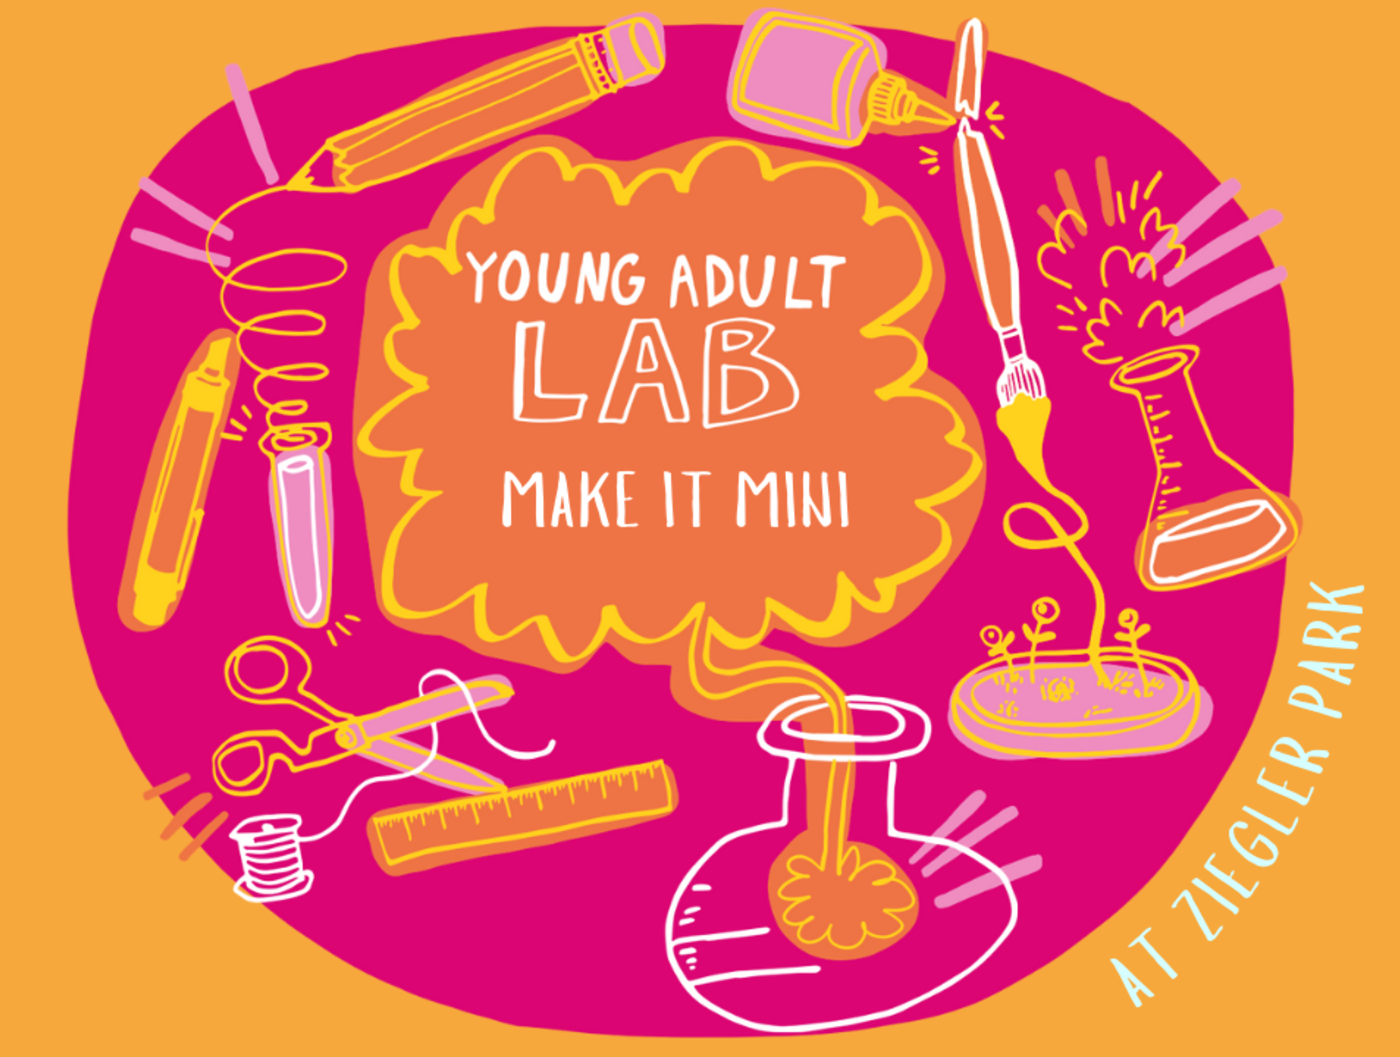 Young Adult Lab at Ziegler Park: Make it Mini